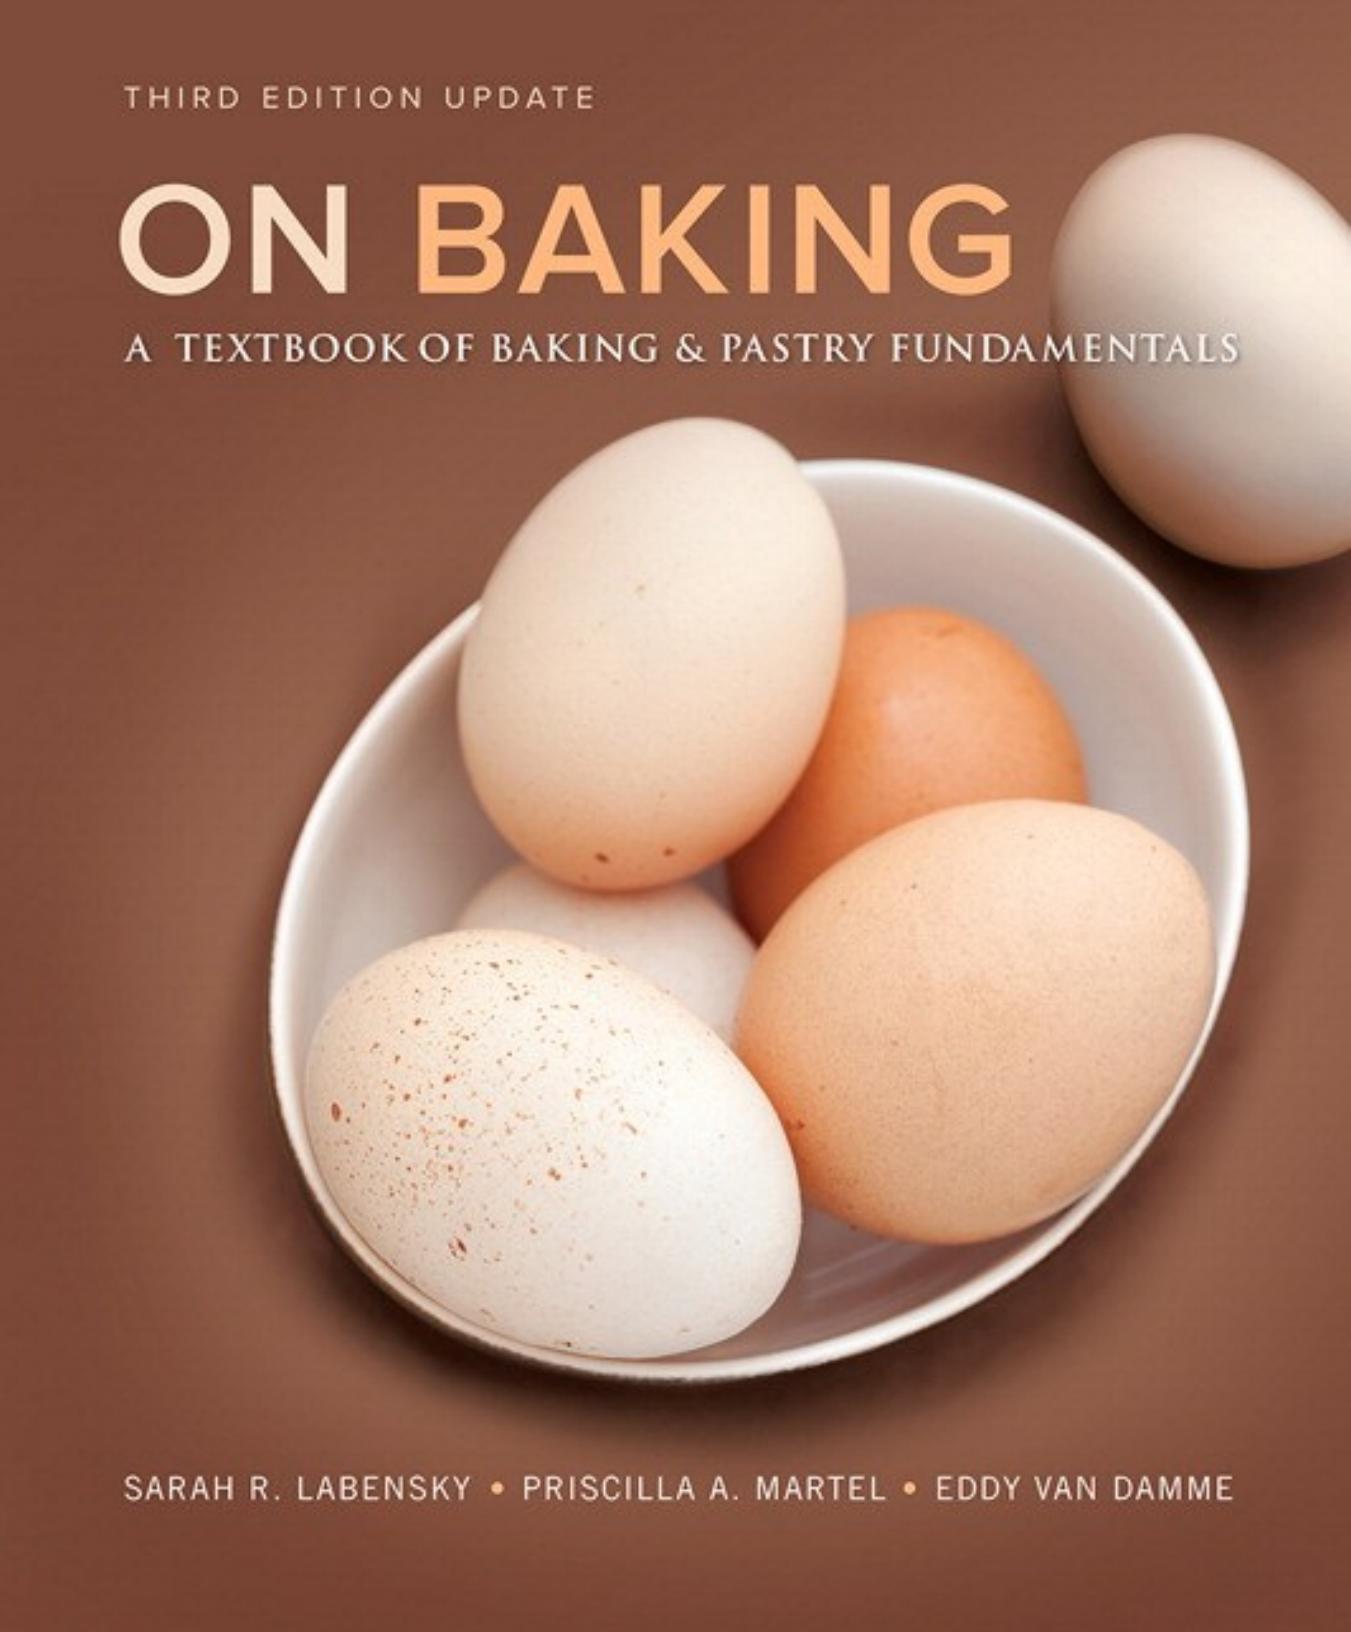 On Baking (Update) A Textbook of Baking and Pastry Fundamentals.jpg